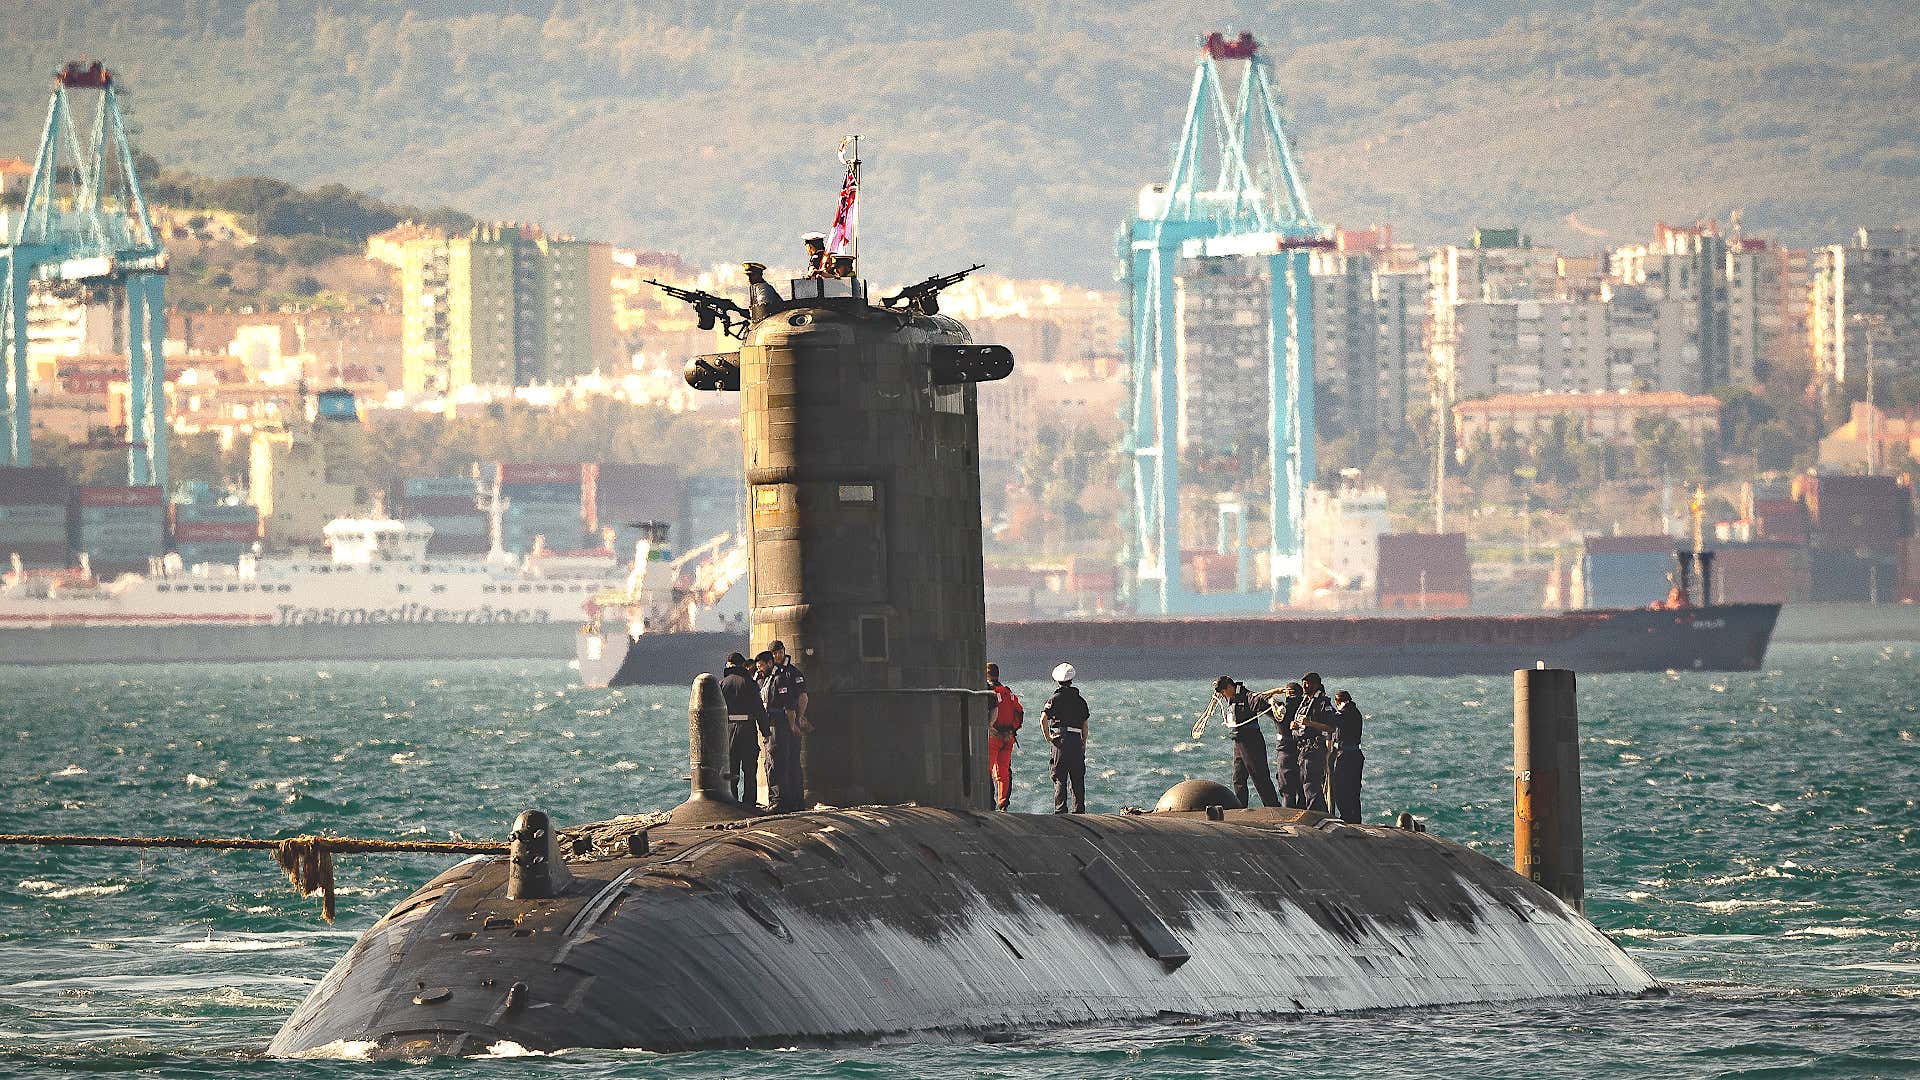 Royal Navy Submarine Appears In Gibraltar Equipped With Enhanced Wake